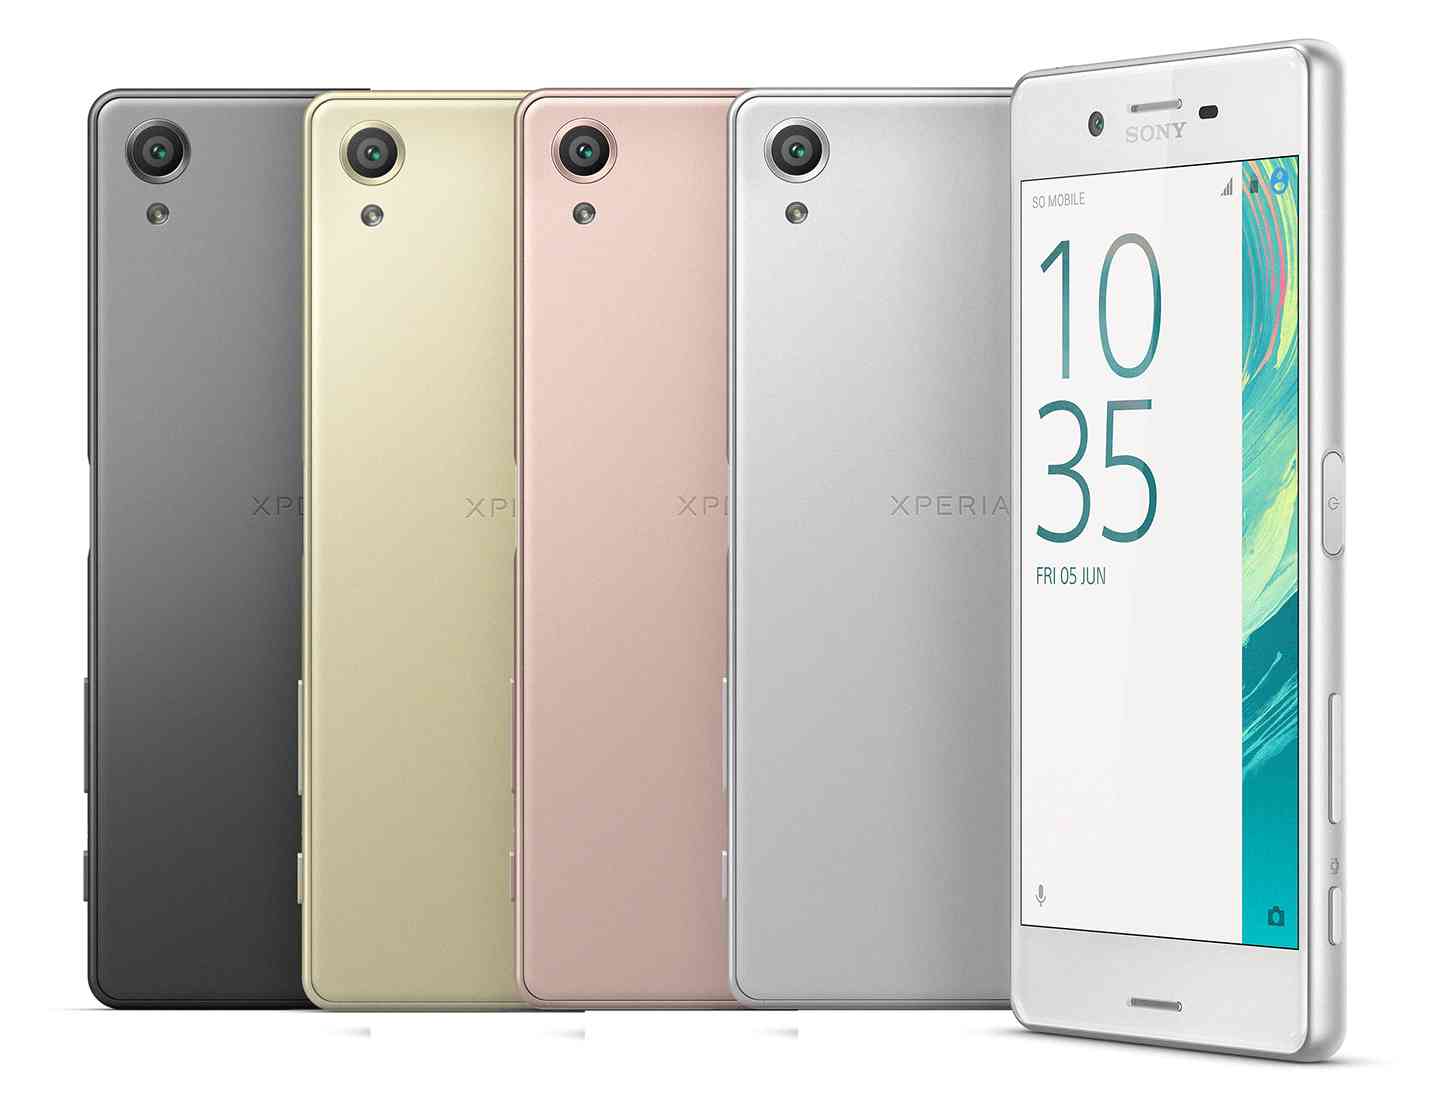 Sony Xperia X colors